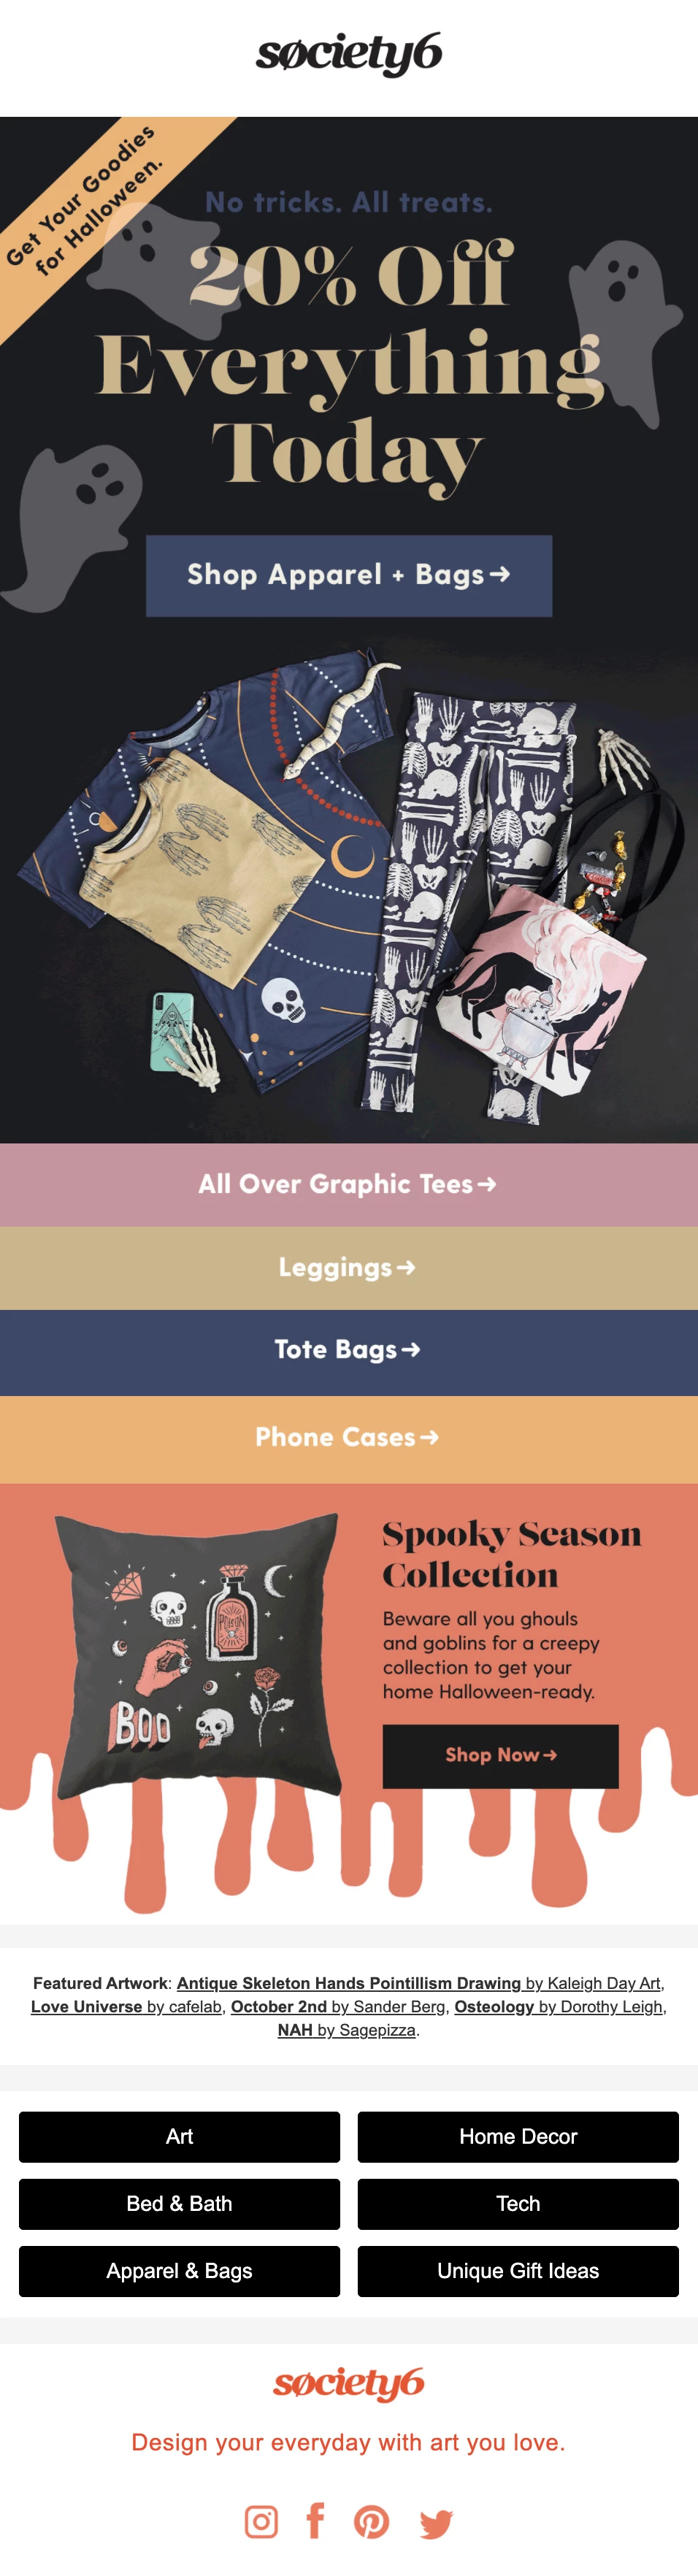 society6 halloween newsletter with ghost design and suggestions for spooky products